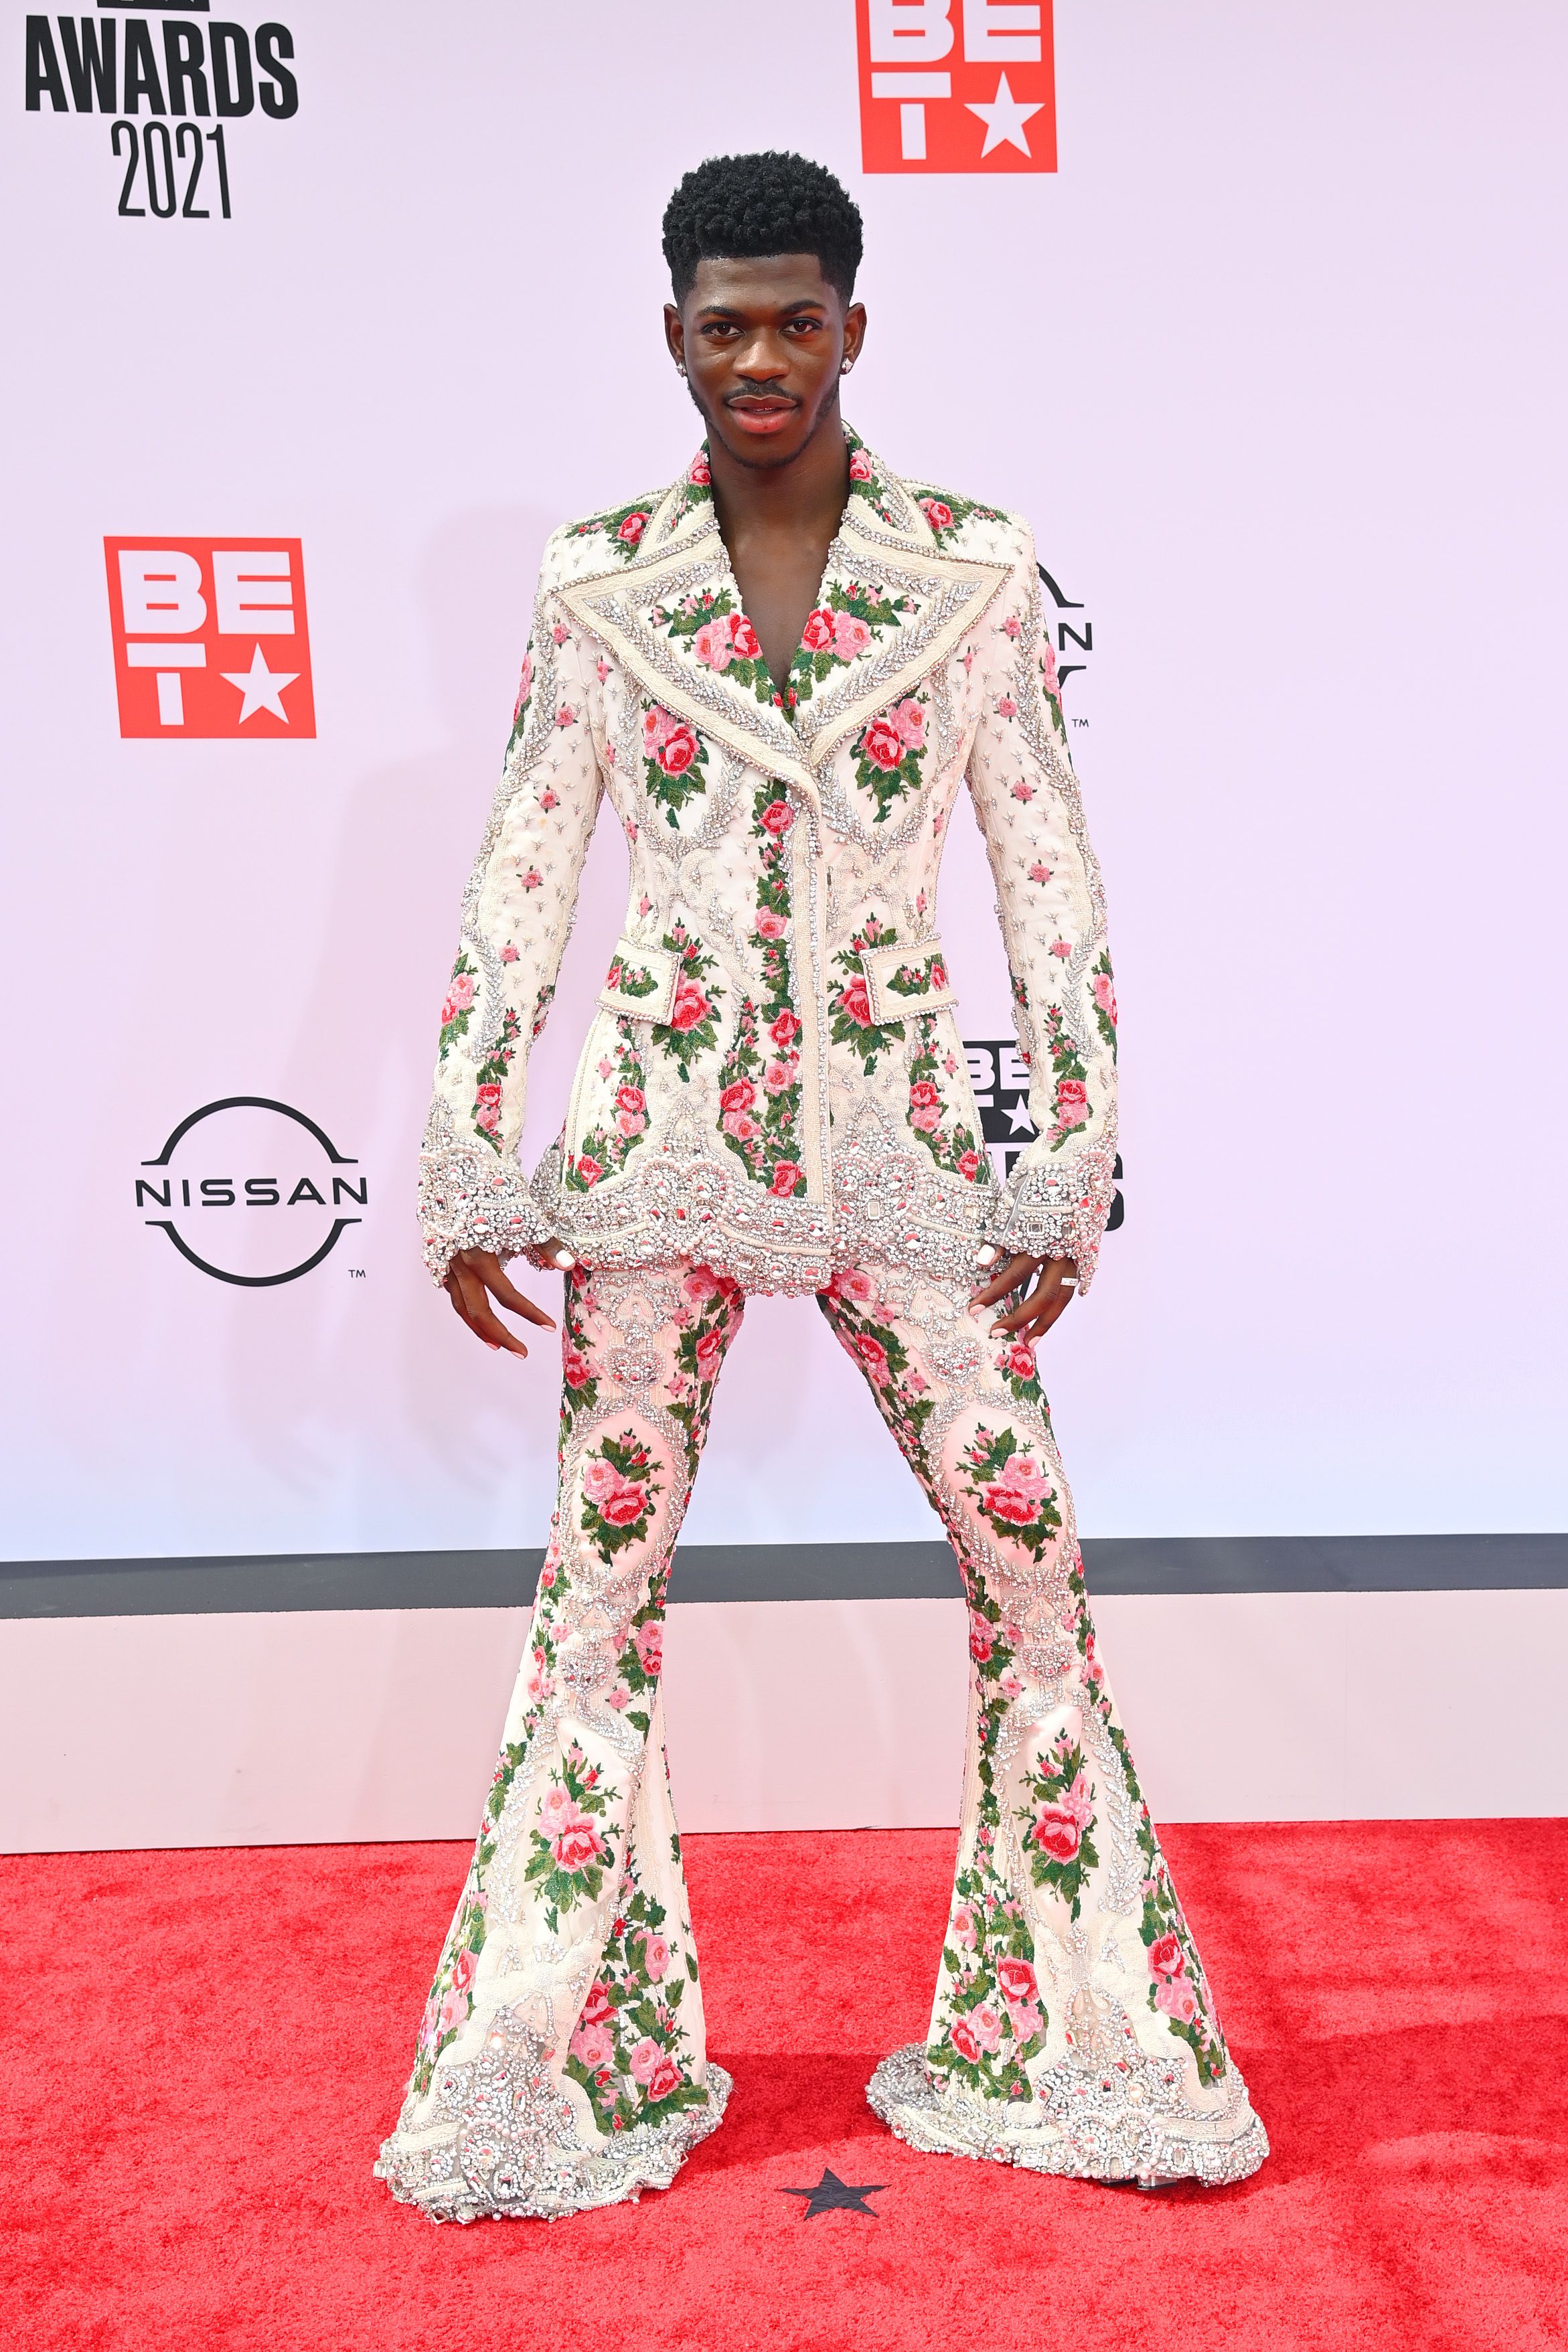 Arriba 80+ imagen lil nas outfit - Abzlocal.mx